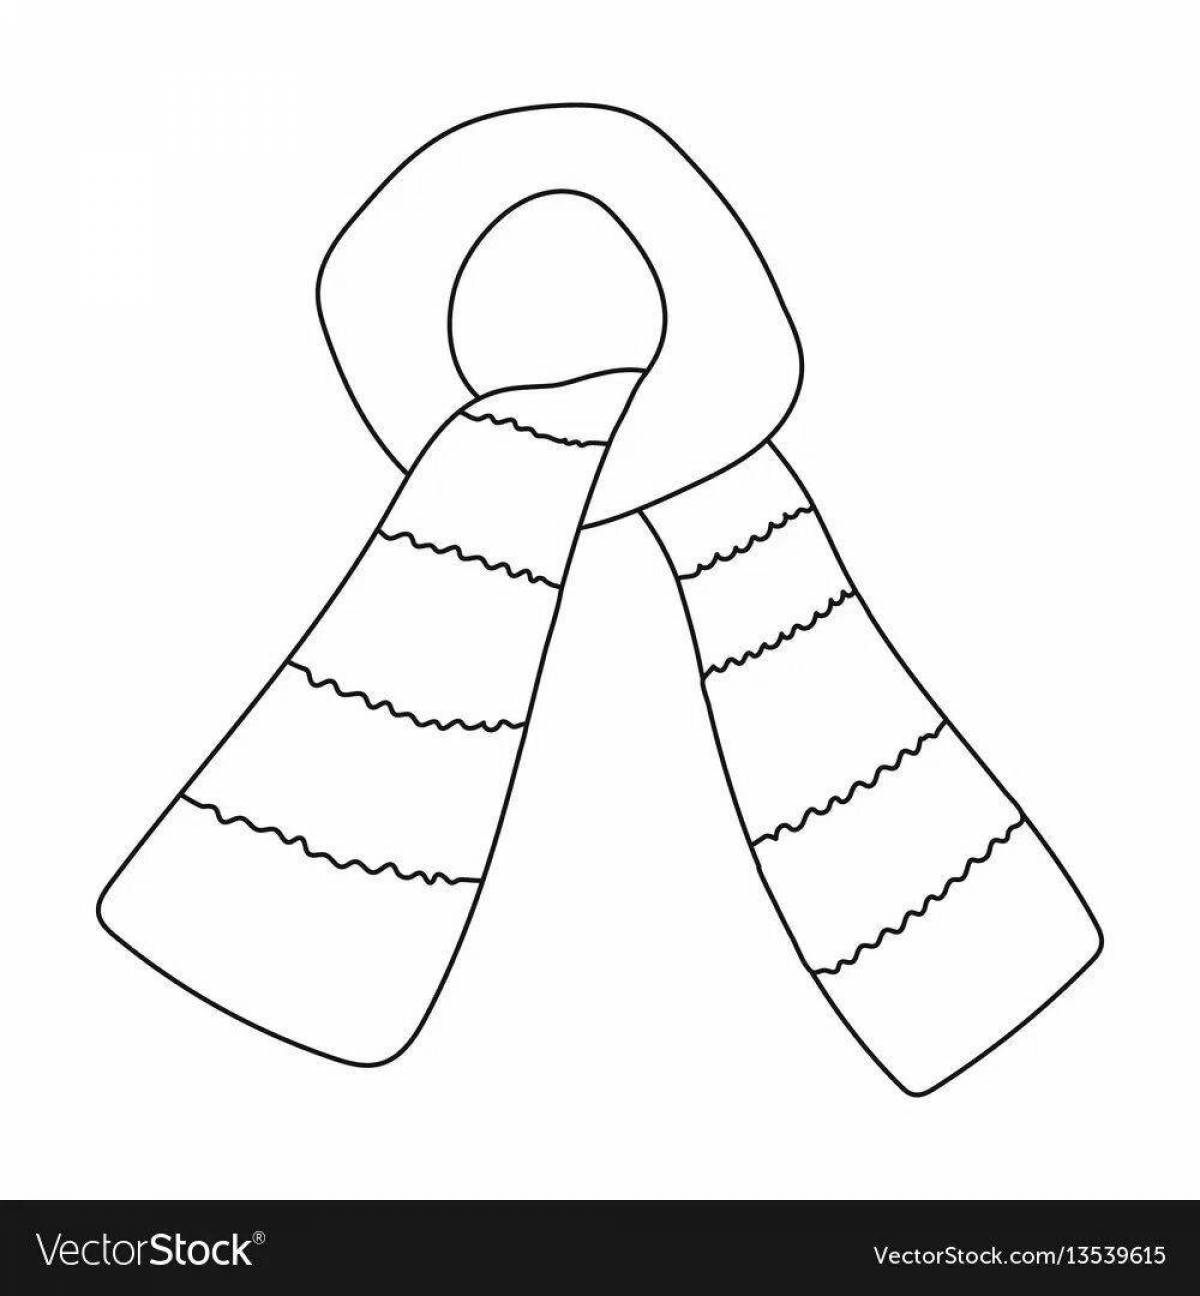 Glitter scarf coloring book for 3-4 year olds